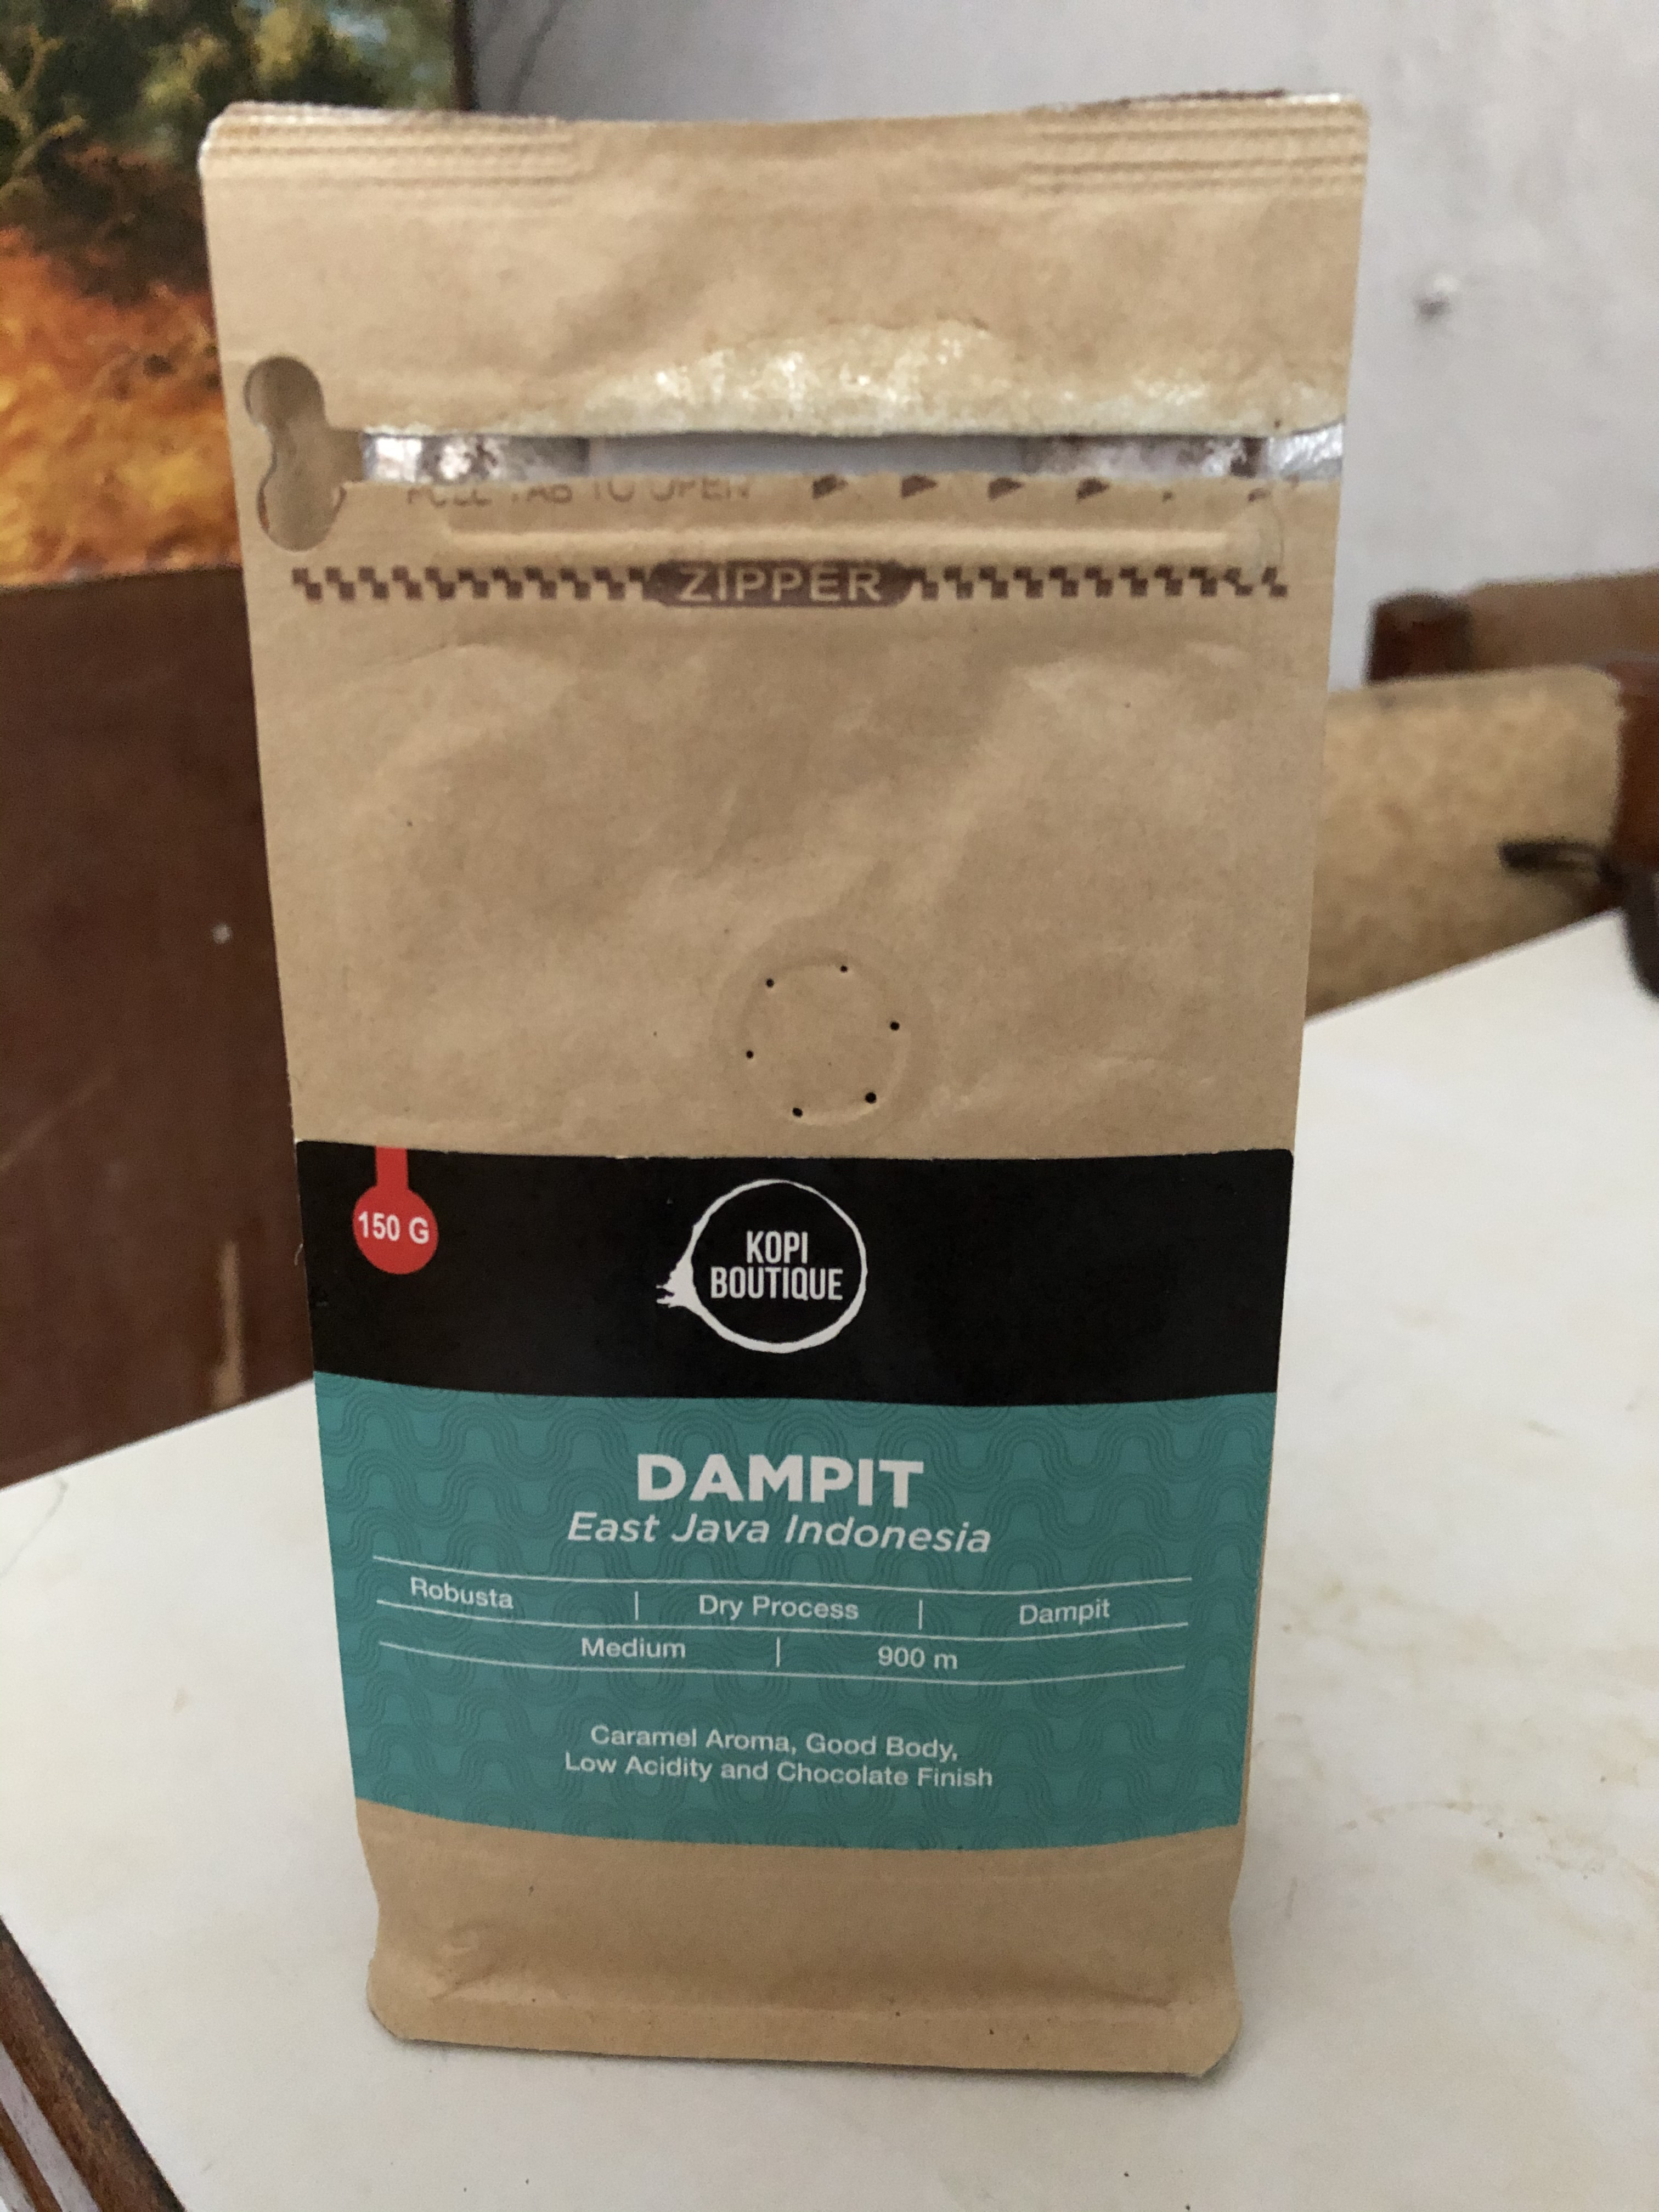 The packaging for Dampit coffee from Kopi Boutique, taken at 2020-05-31.